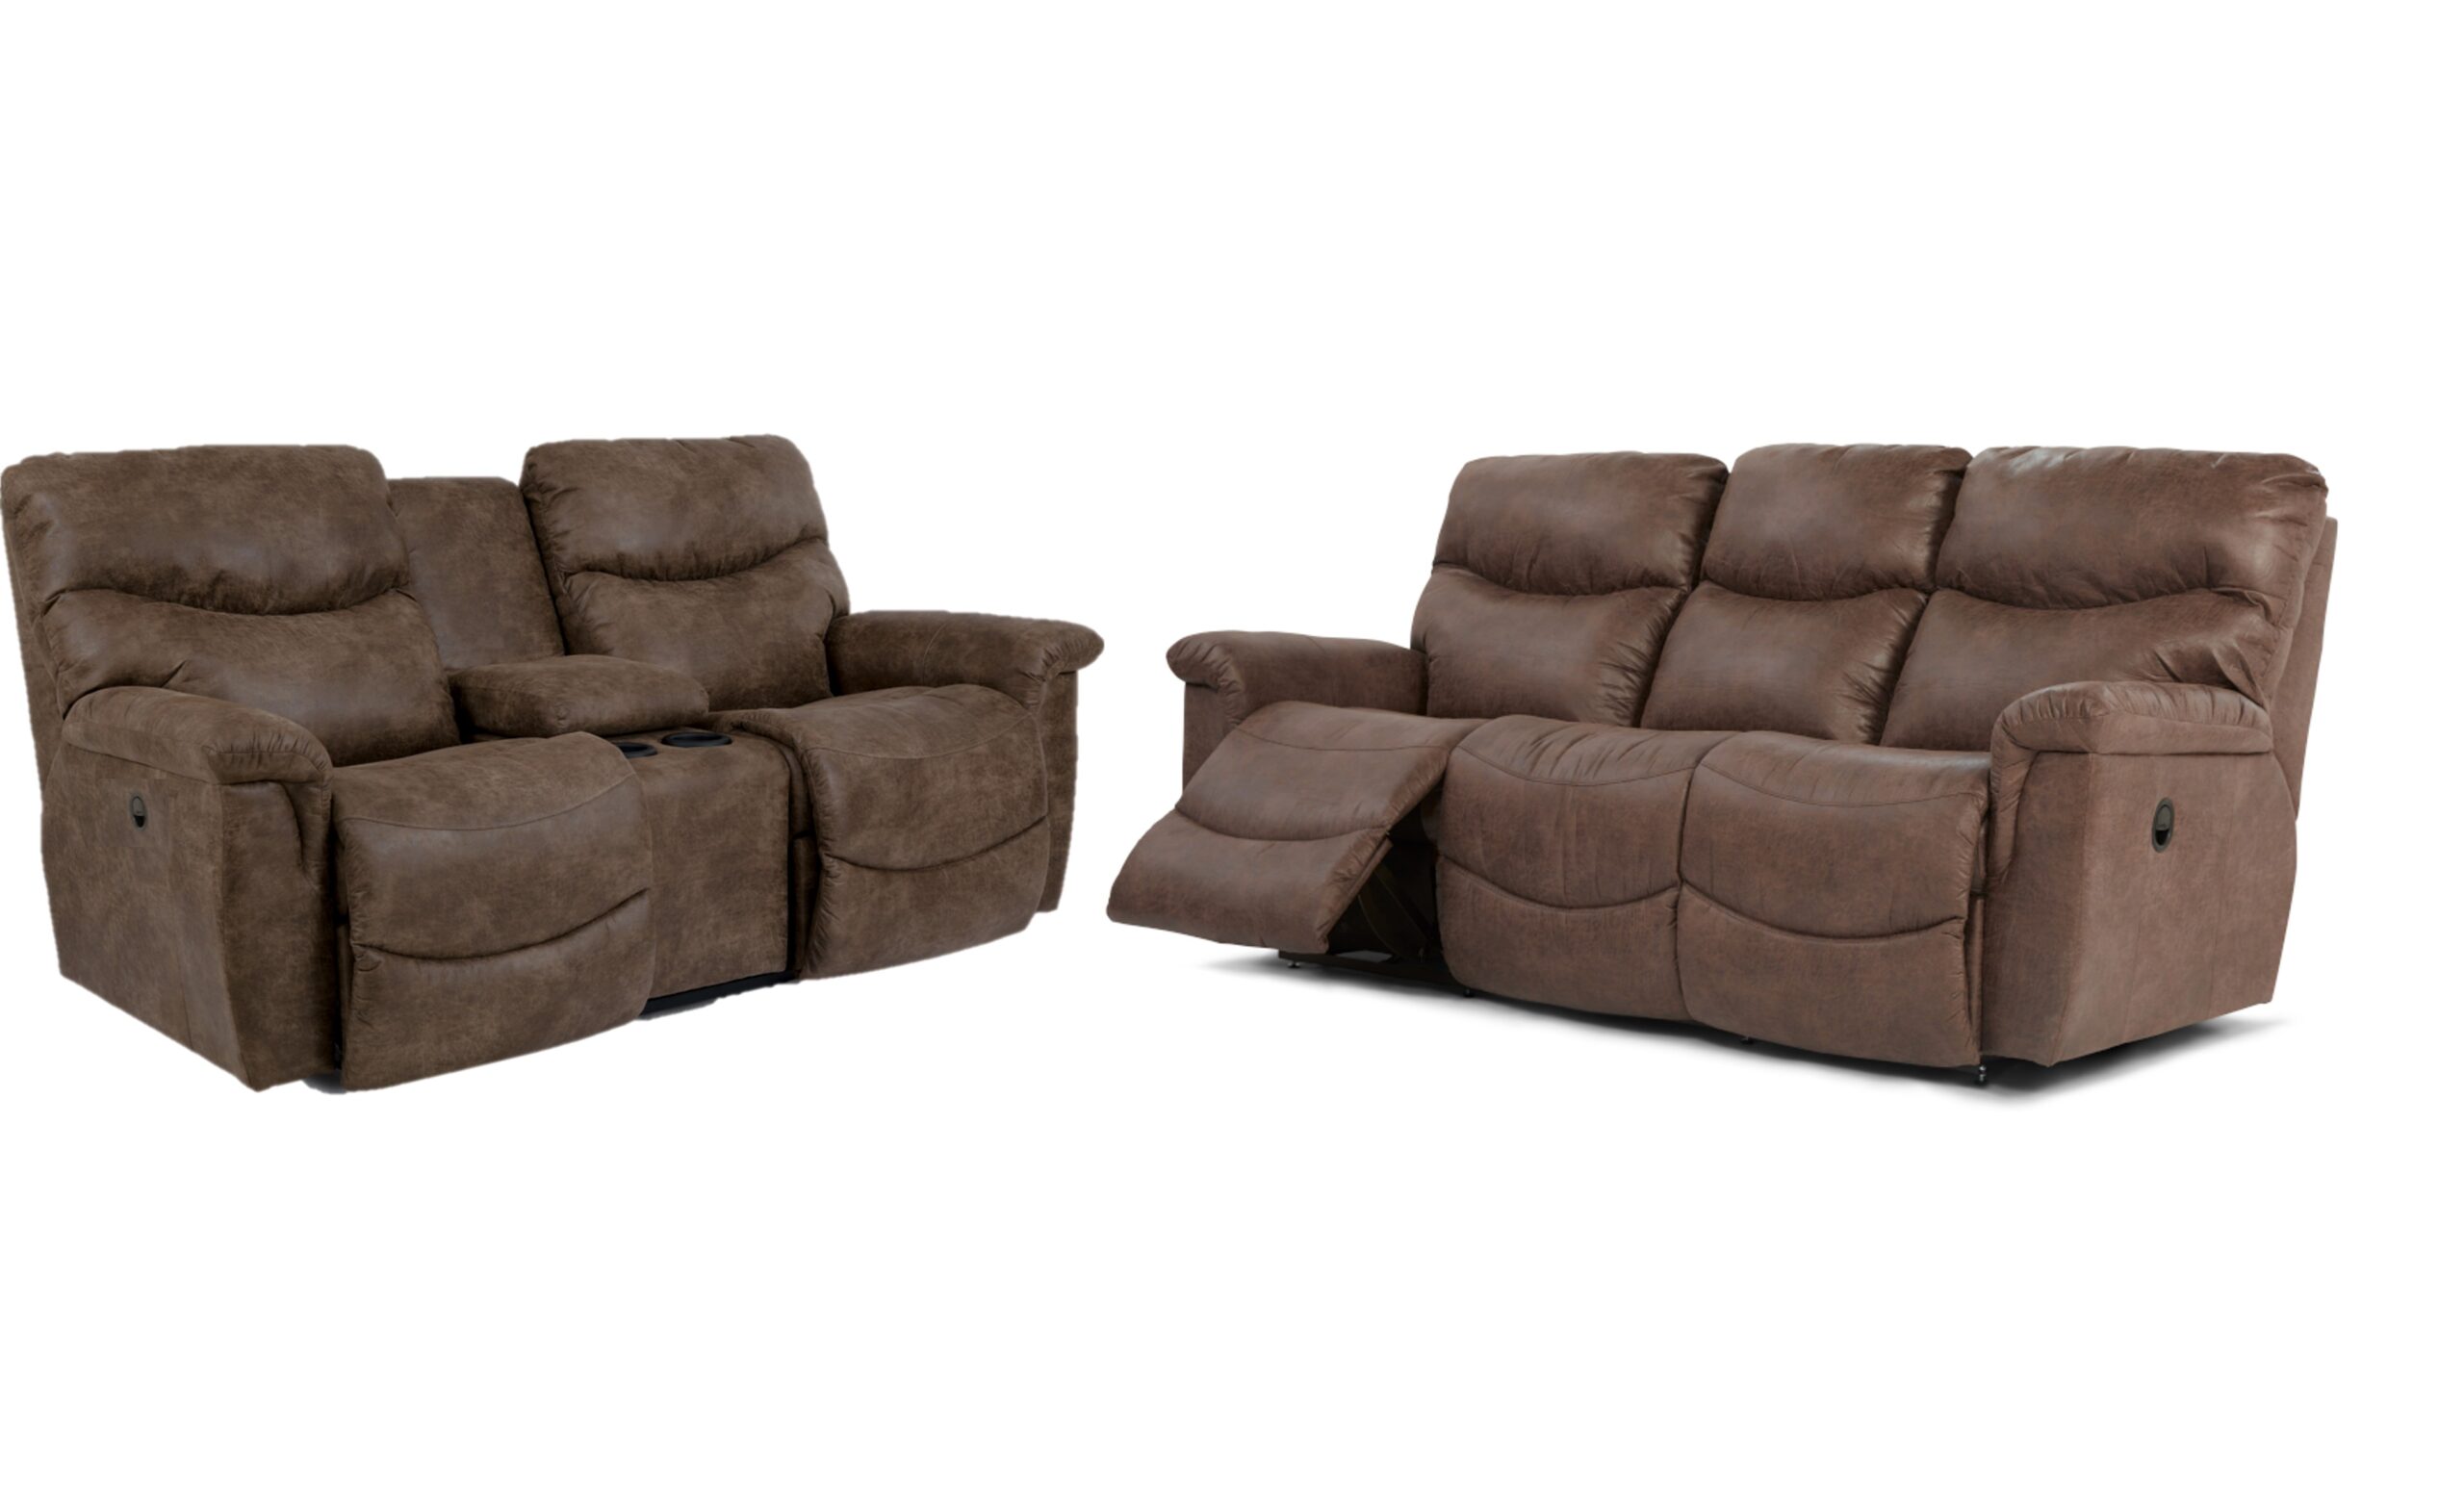 JAMES 521-RE9947-78 sofa and loveseat